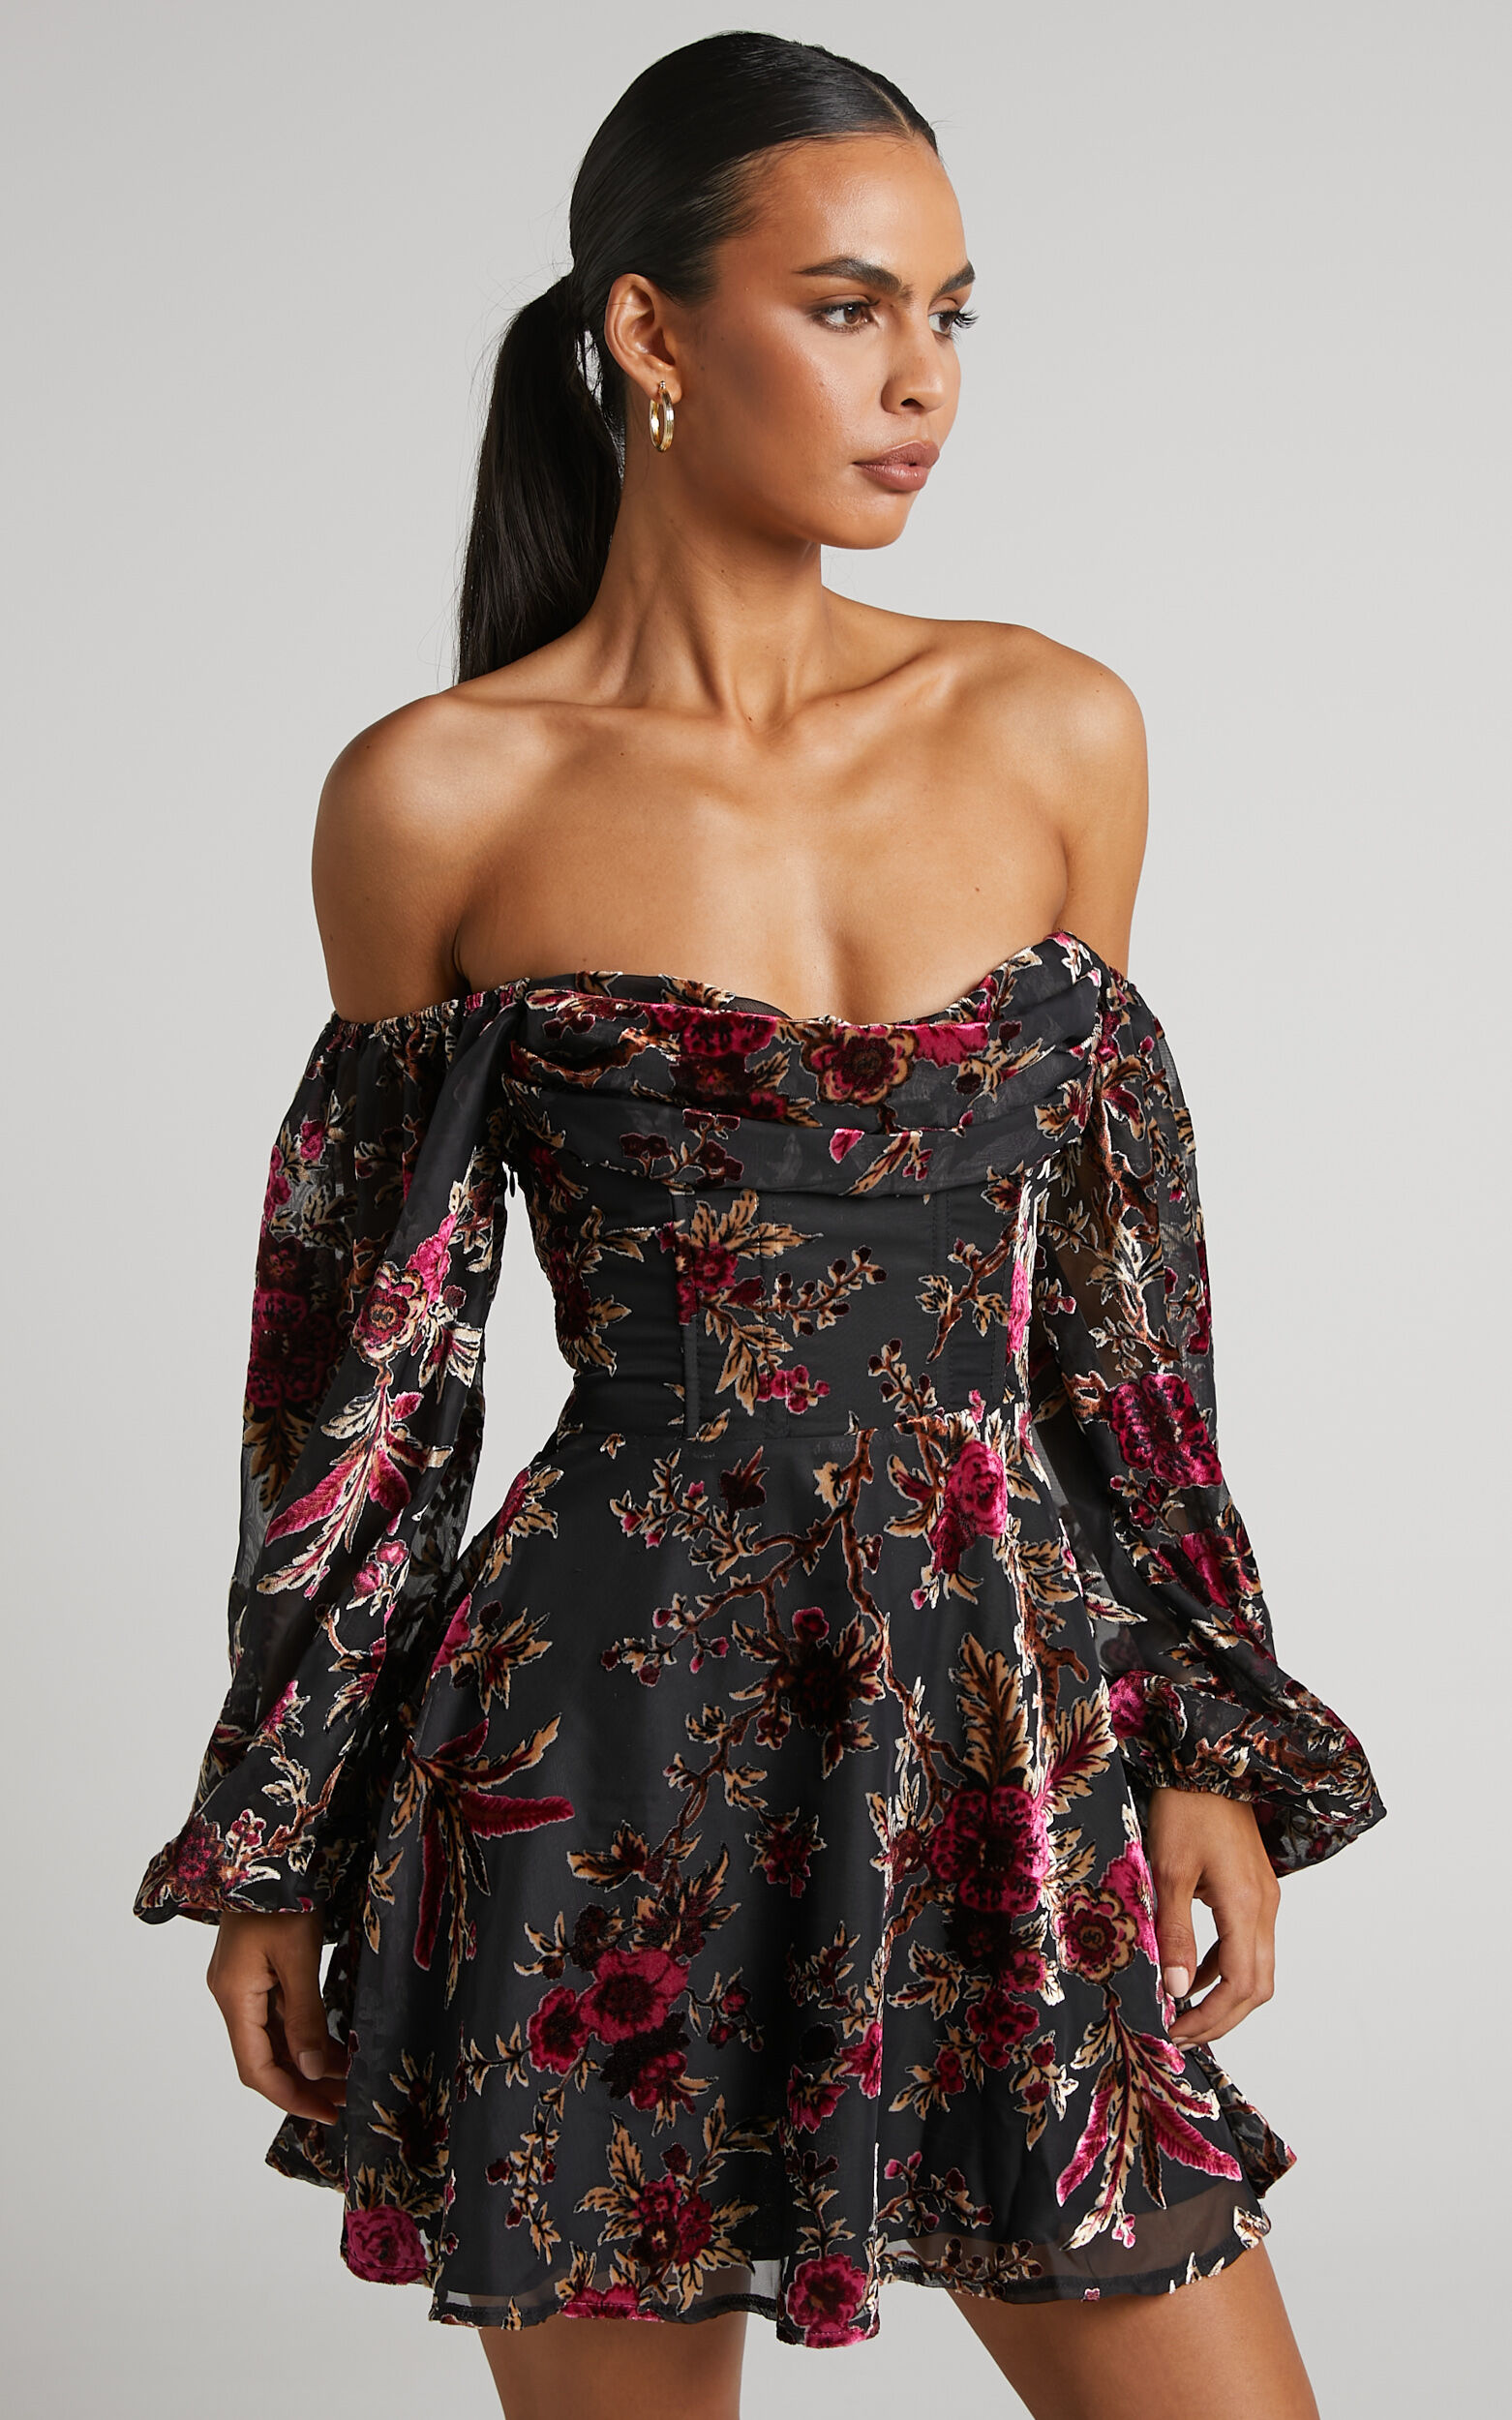 Jessell Mini Dress - Long Sleeve Cowl Corset Dress in Black Floral - 04, BLK1, super-hi-res image number null